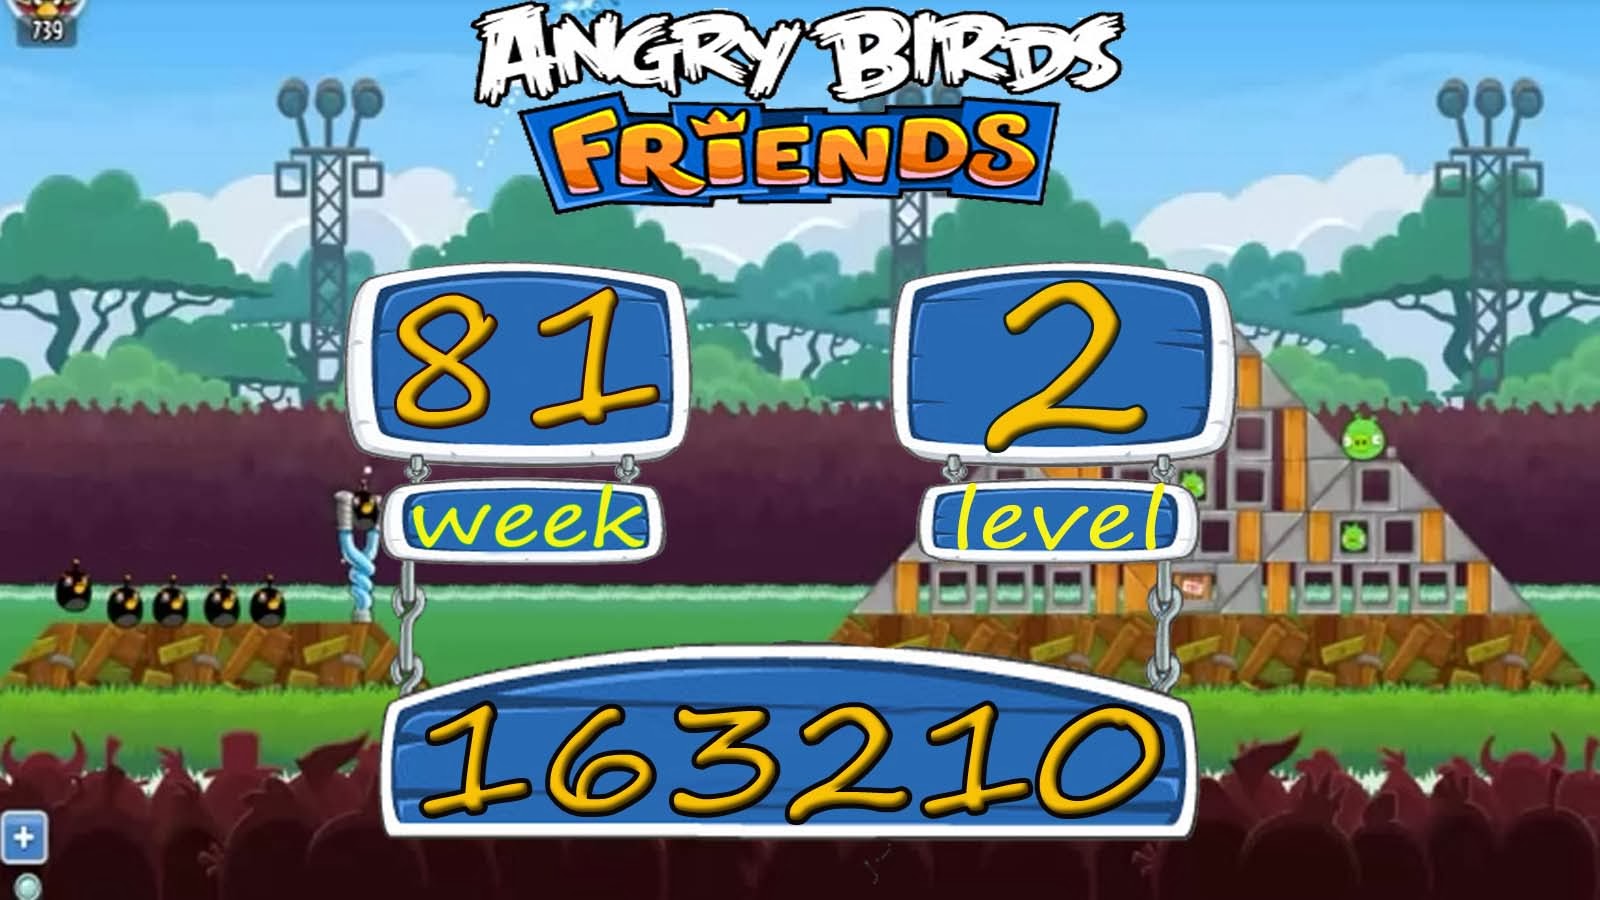 how to beat angry birds friends tournament level 4 june 18, 2018